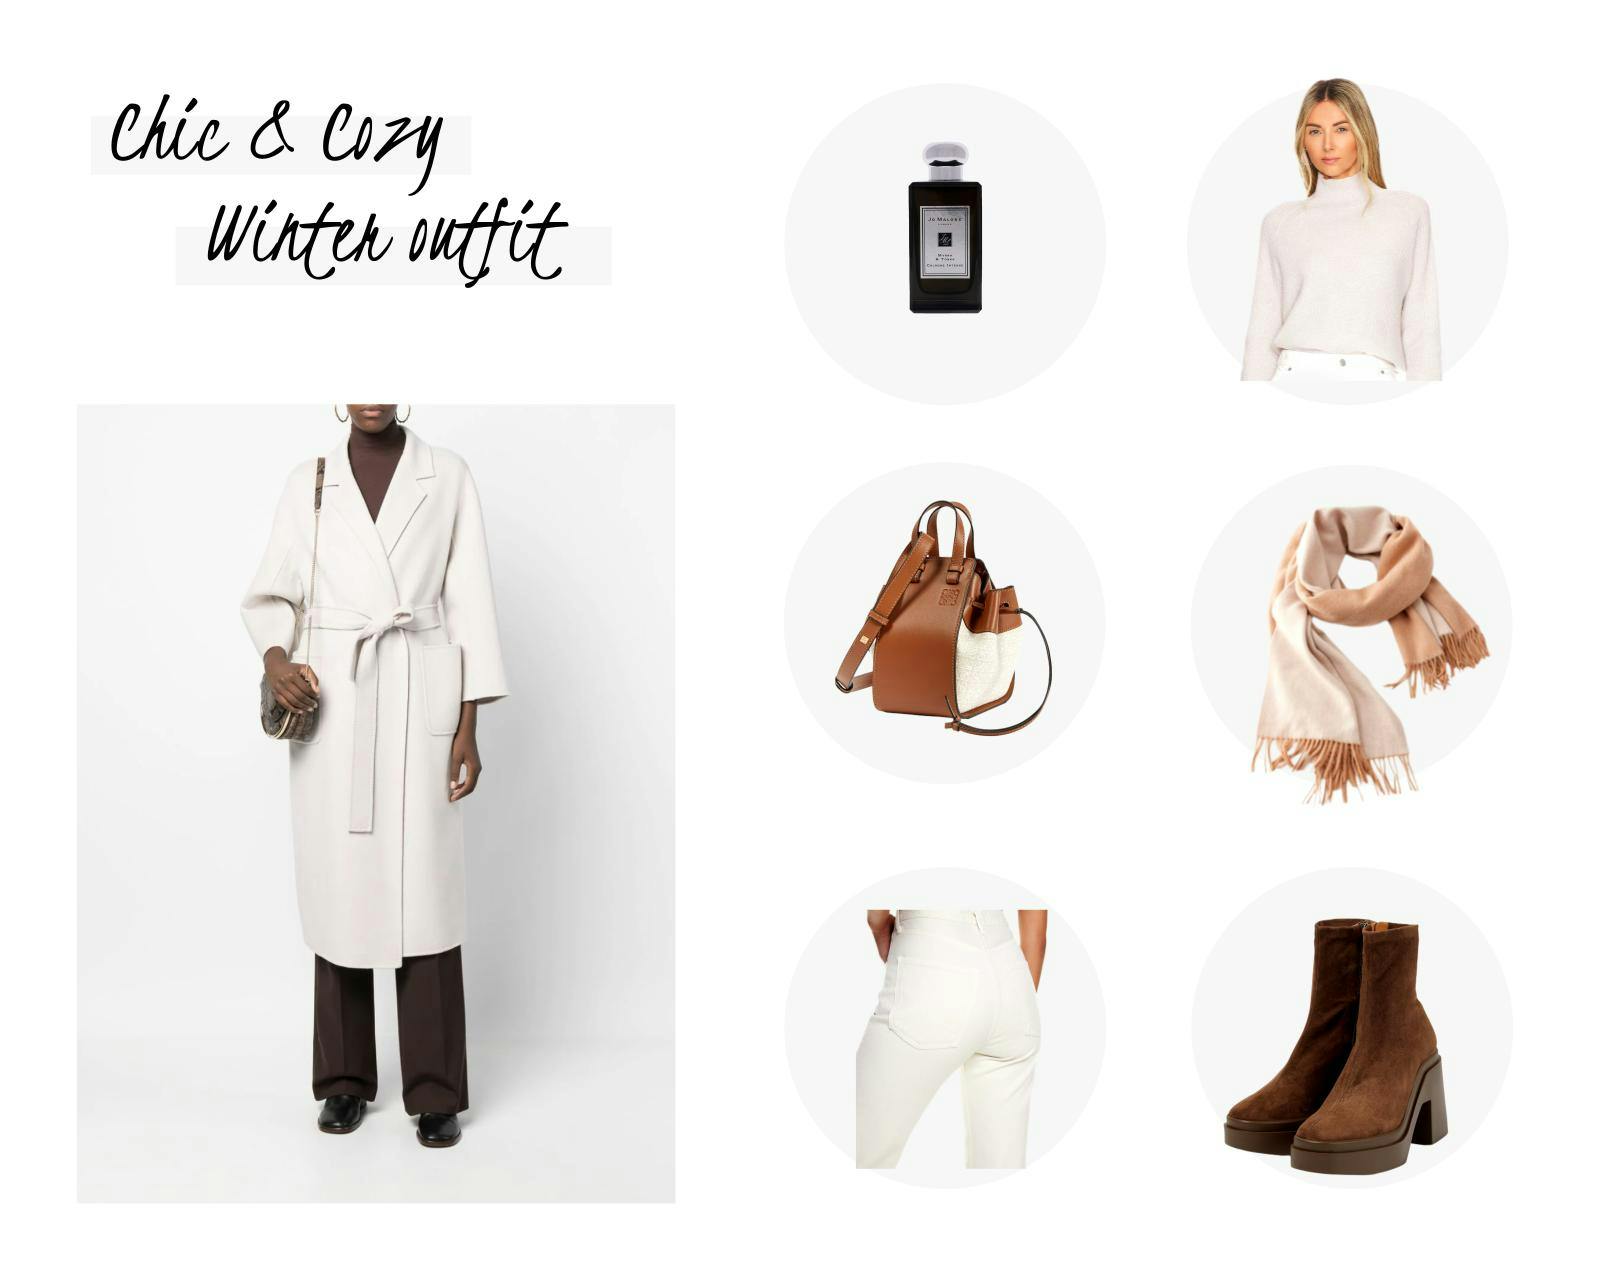 Chic and cosy white winter outfit with details in camel and brown